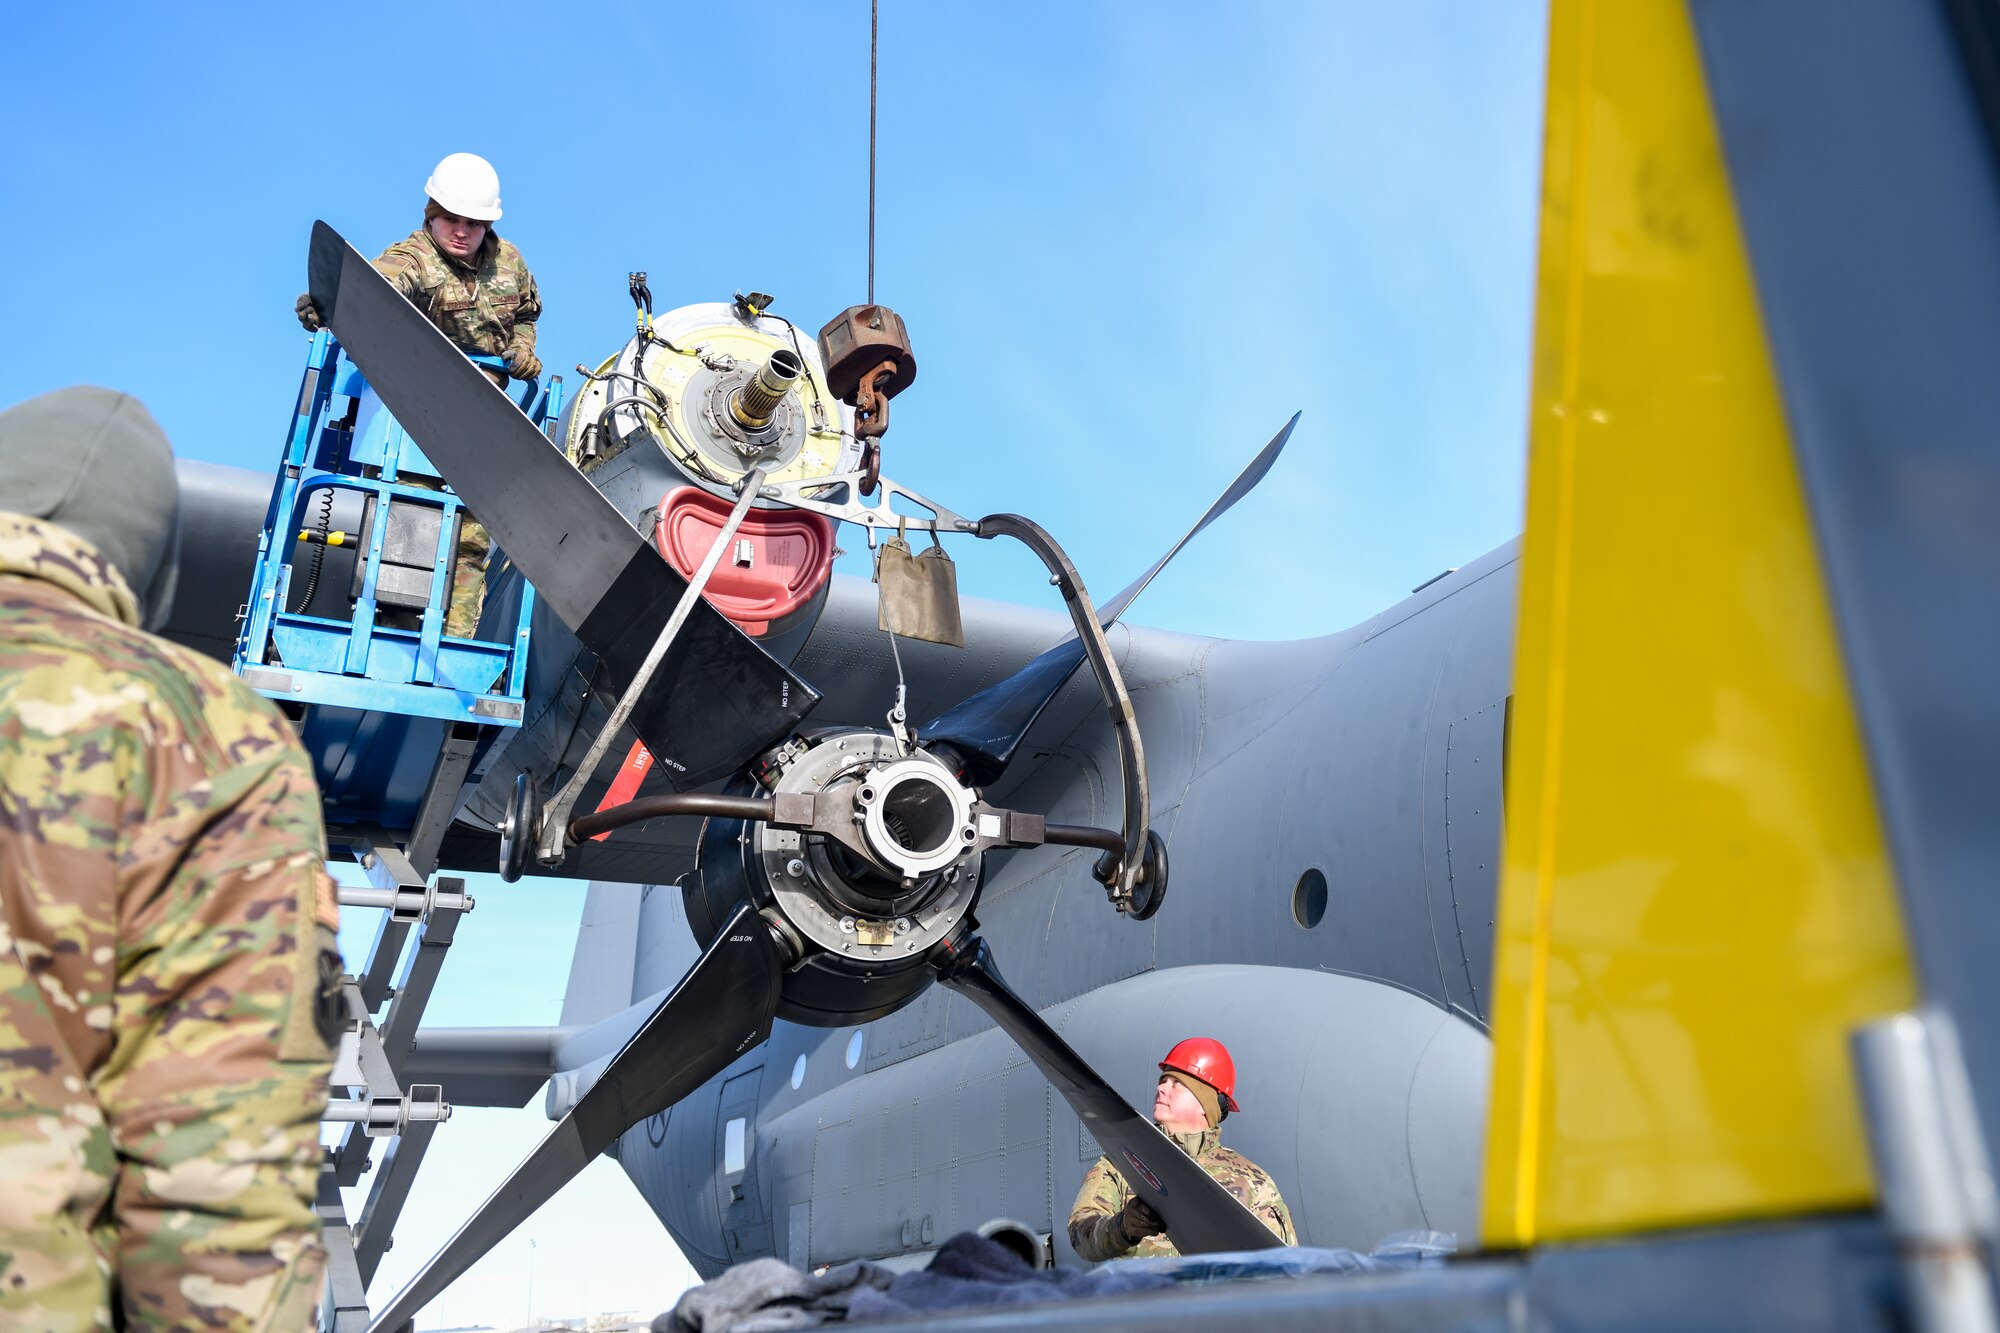 Aerospace propulsion technicians assigned to the 910th Aircraft Maintenance Squadron raise a propeller into position for installation onto a 910th Airlift Wing C-130H Hercules aircraft, Jan. 17, 2023, at Mountain Home Air Force Base, Idaho.